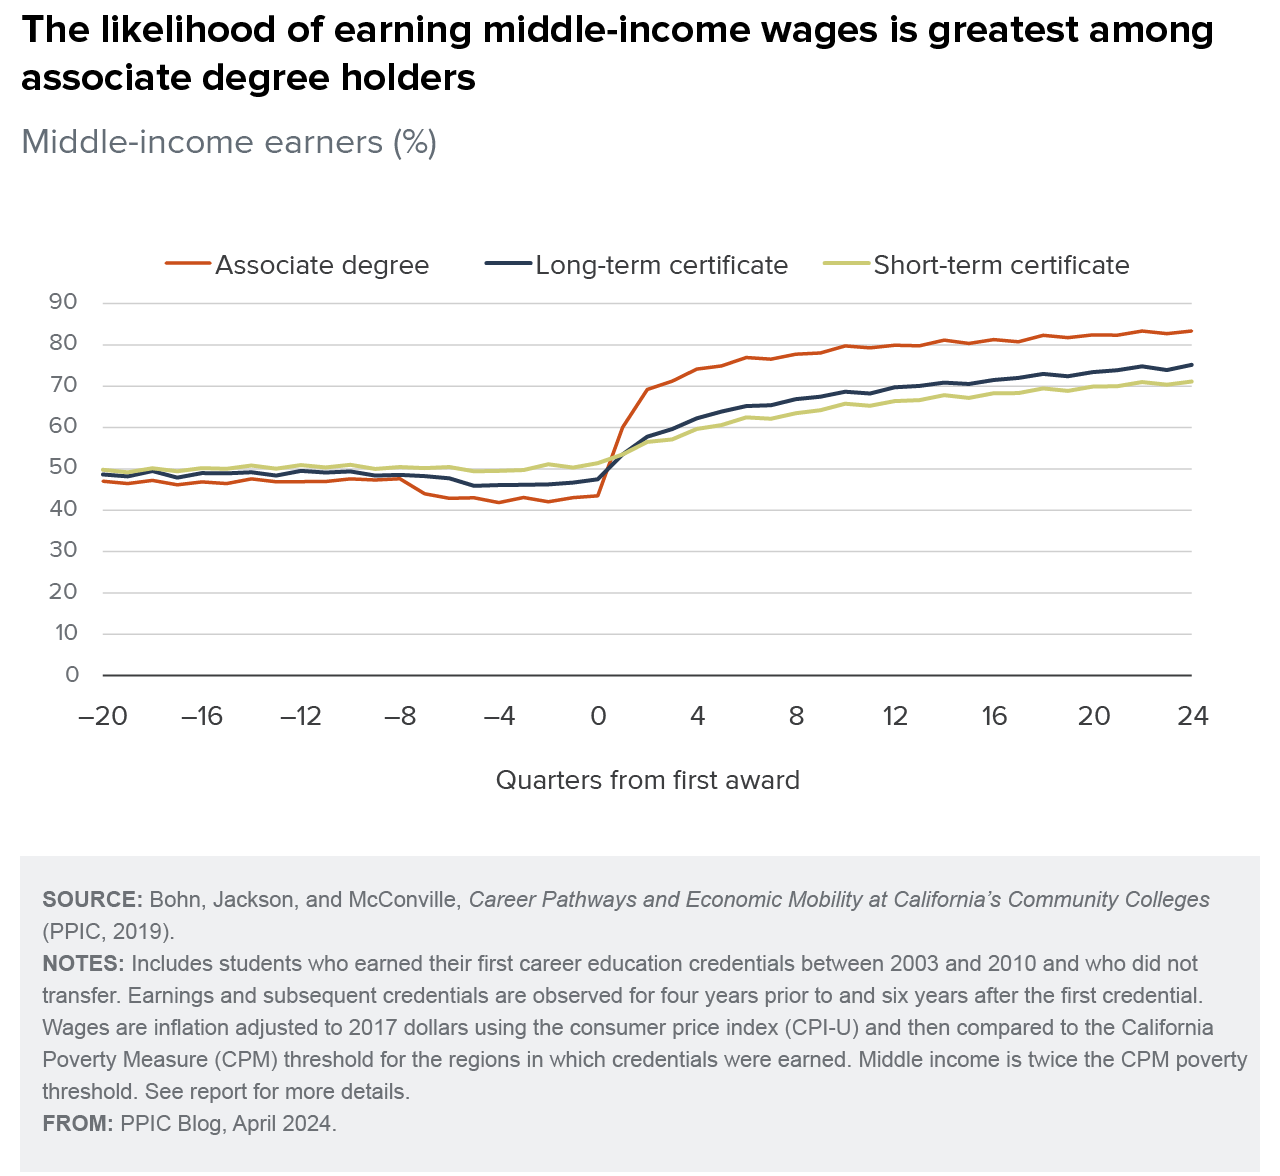 figure - The likelihood of earning middle-income wages is greatest among associate degree holders